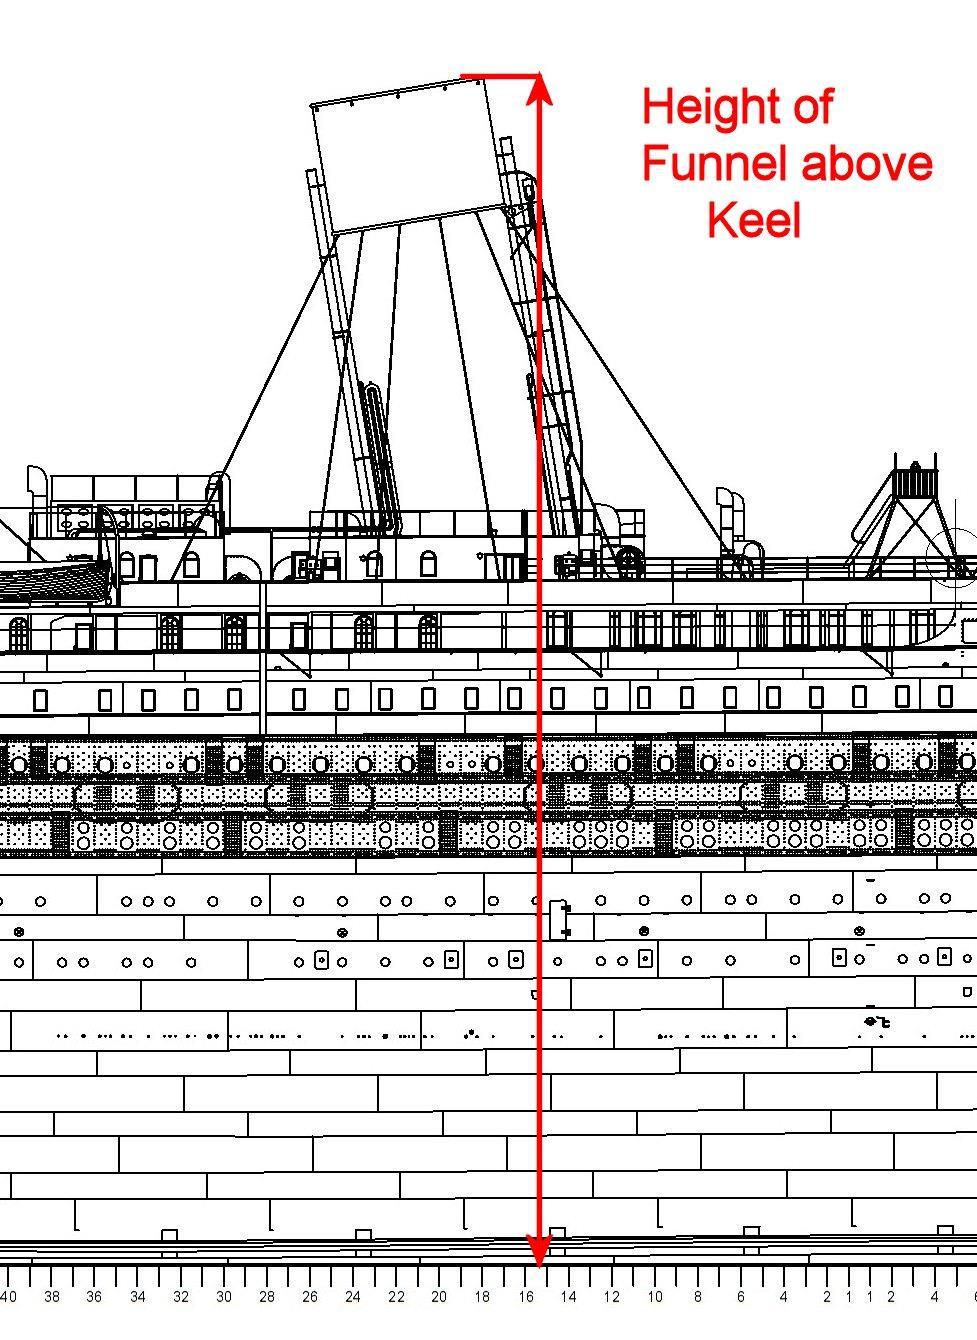 Figure 3 The actual measurements taken for the height of each funnel above the keel for the four funnels is shown below.